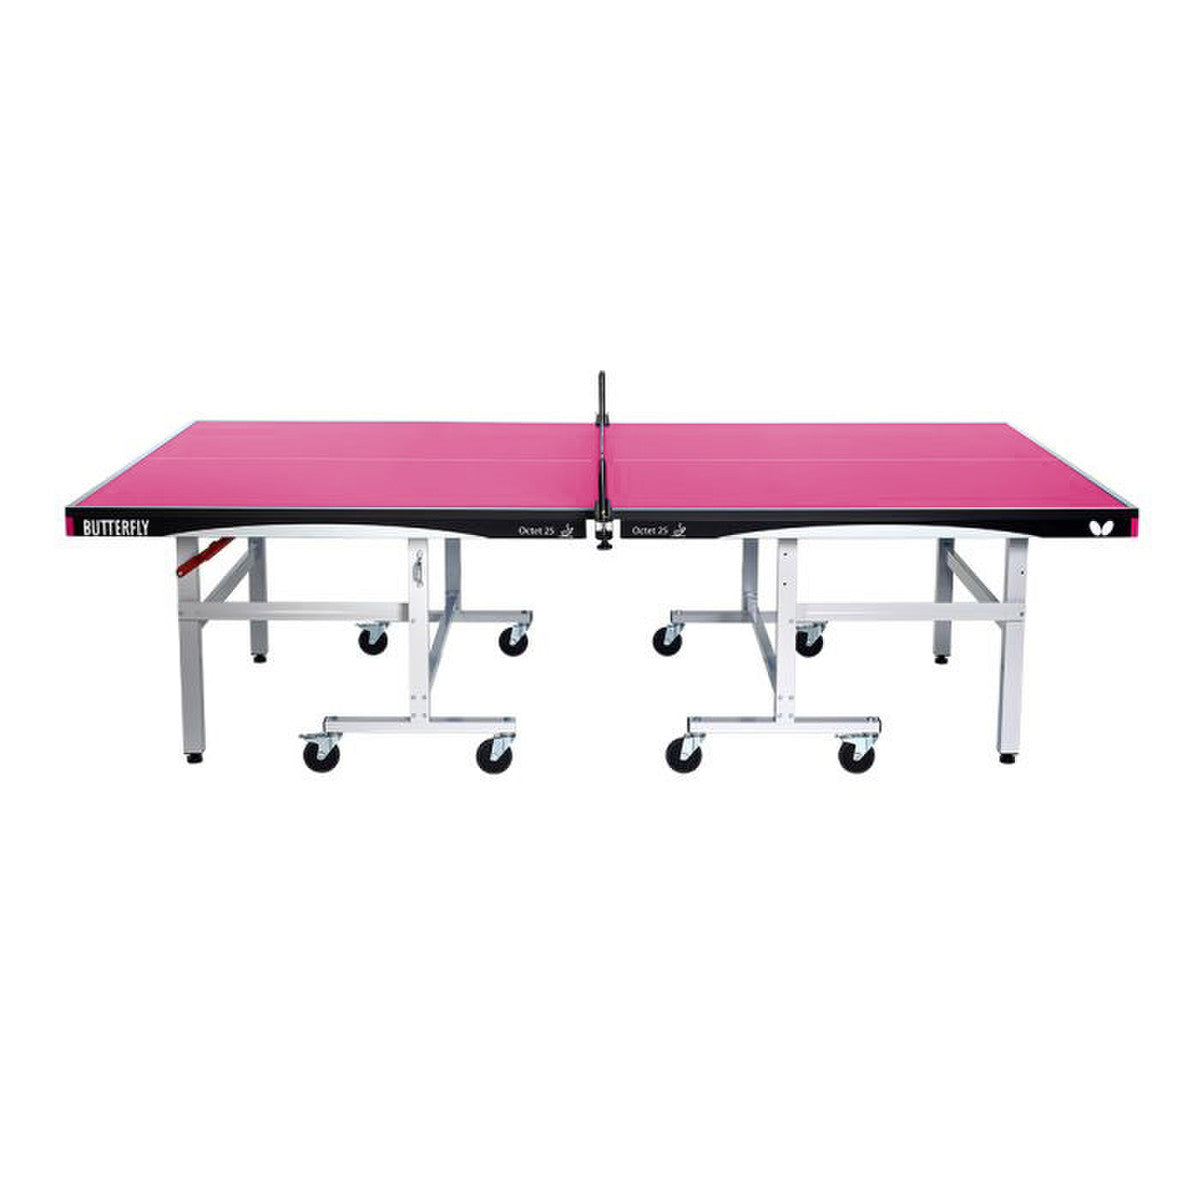 Butterfly Octet 25 Rollaway Table Tennis Table Magenta